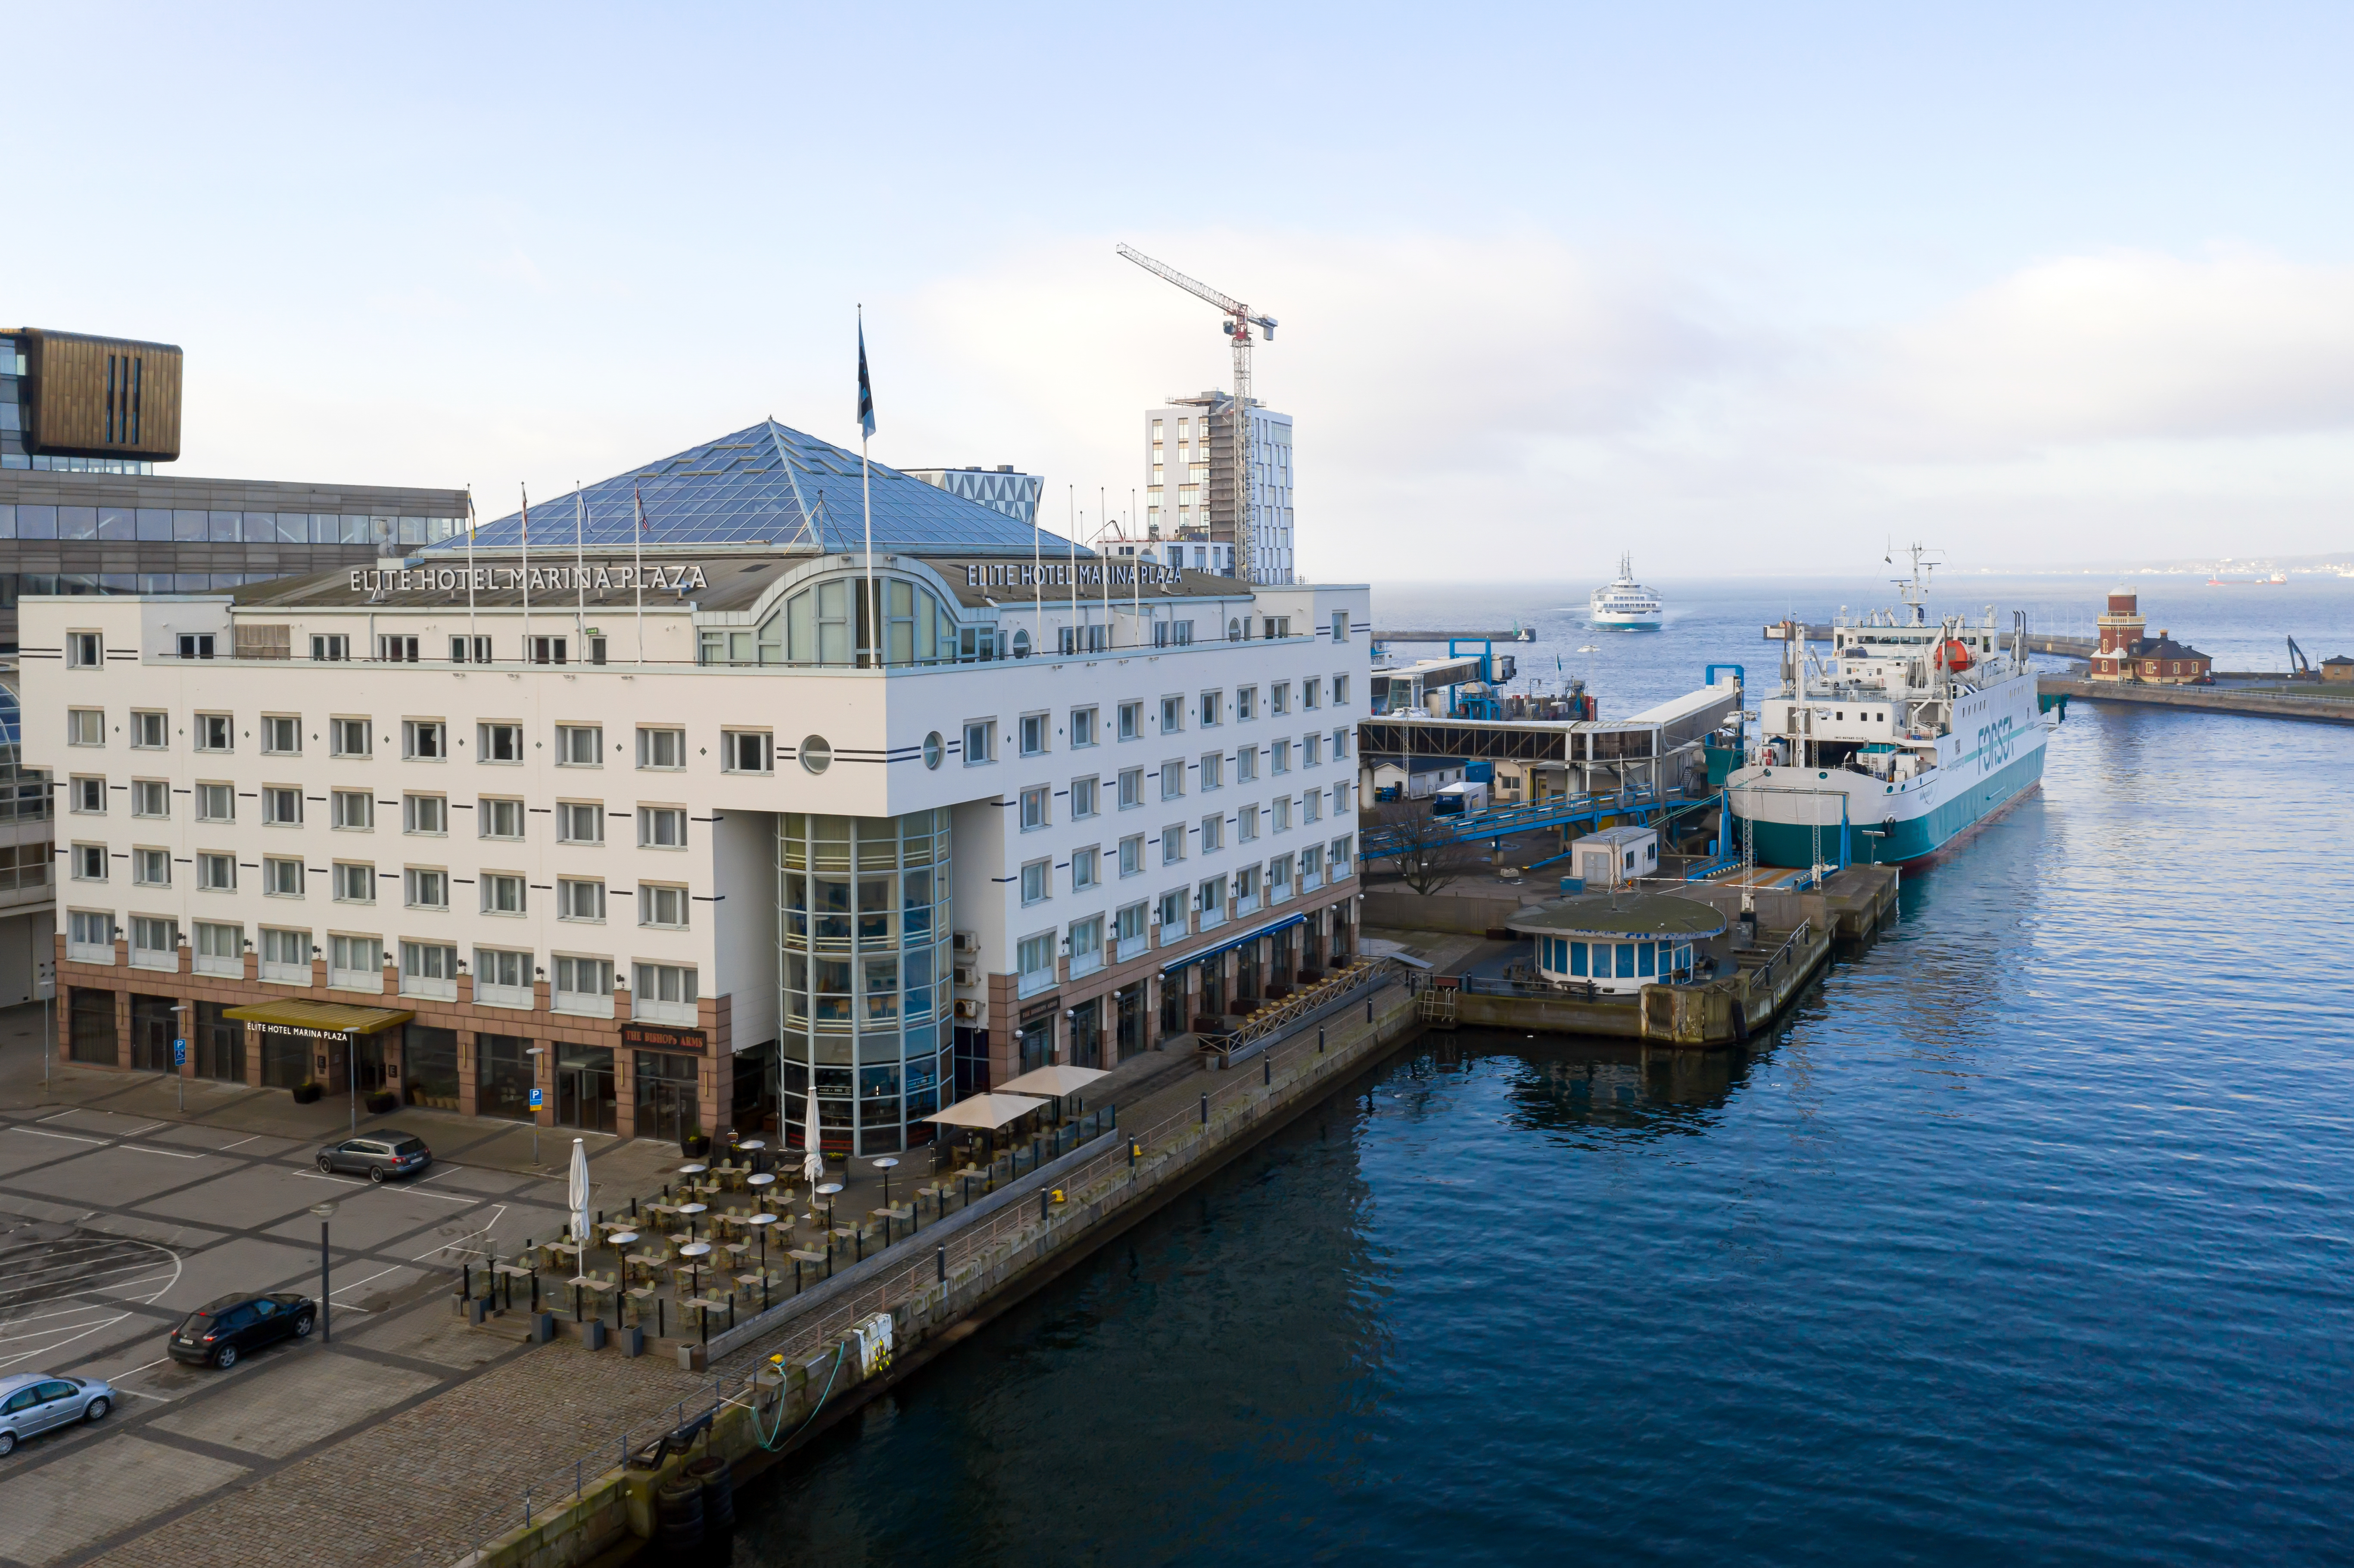 The white facade of the Elite Hotel Marina Plaza with Helsingborg's harbor in front